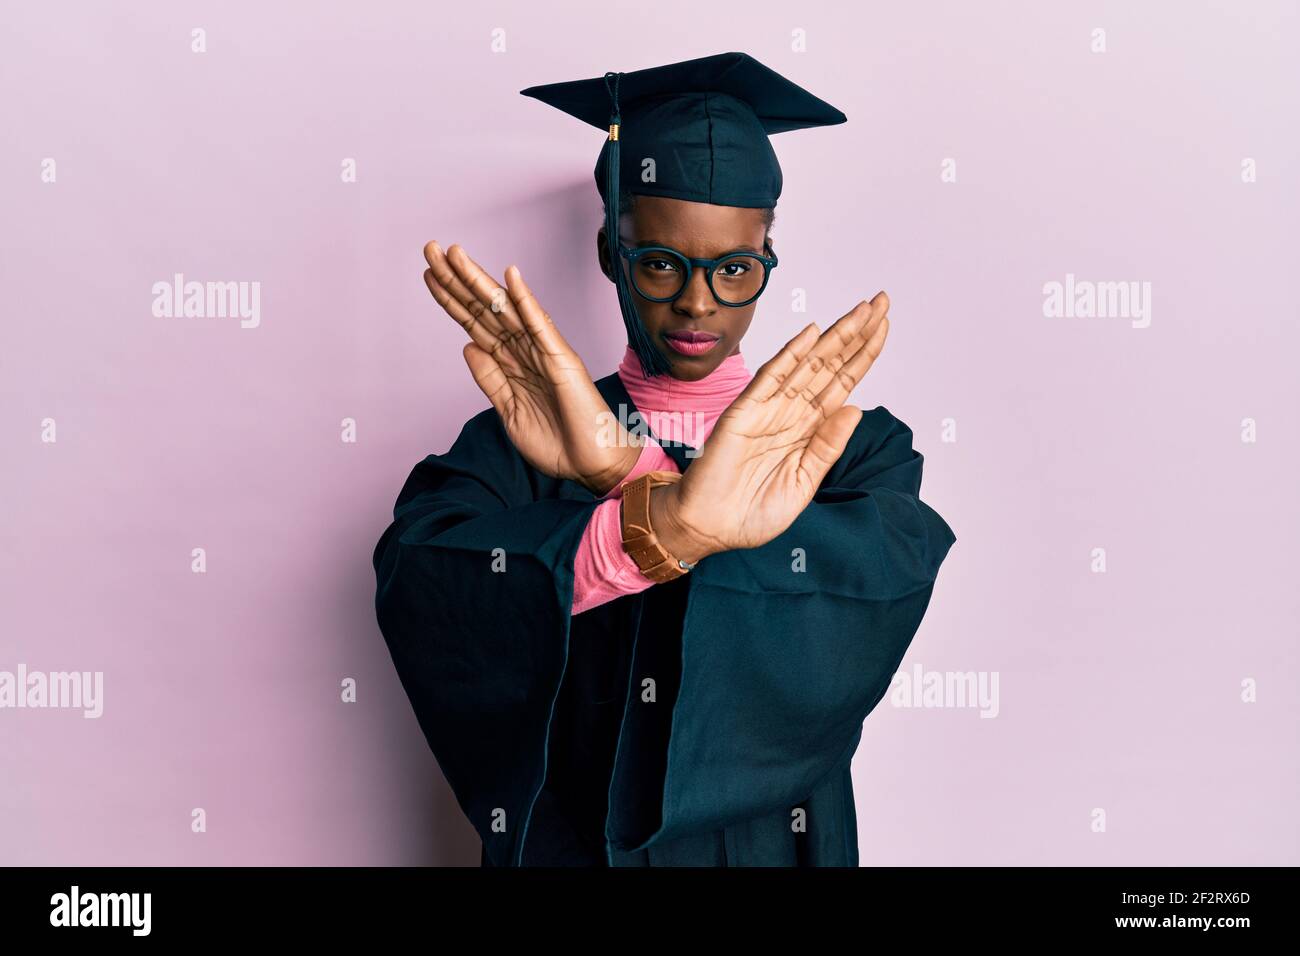 Young african american girl wearing graduation cap and ceremony robe rejection expression crossing arms doing negative sign, angry face Stock Photo